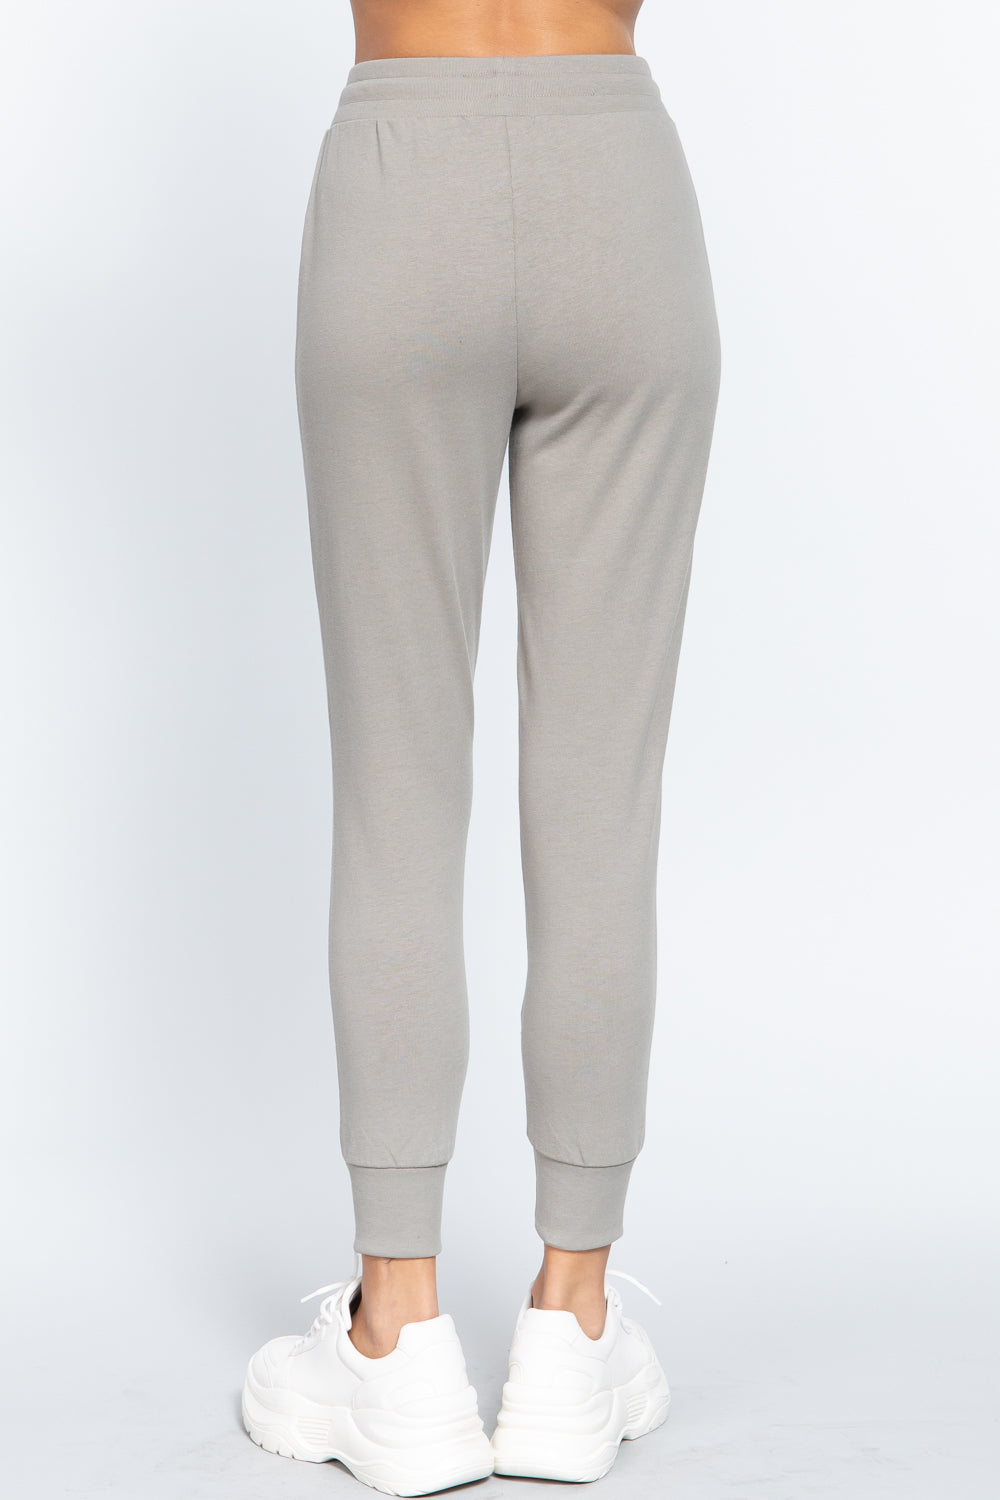 Waist Band Long Sweatpants With Pockets - Love It Clothing